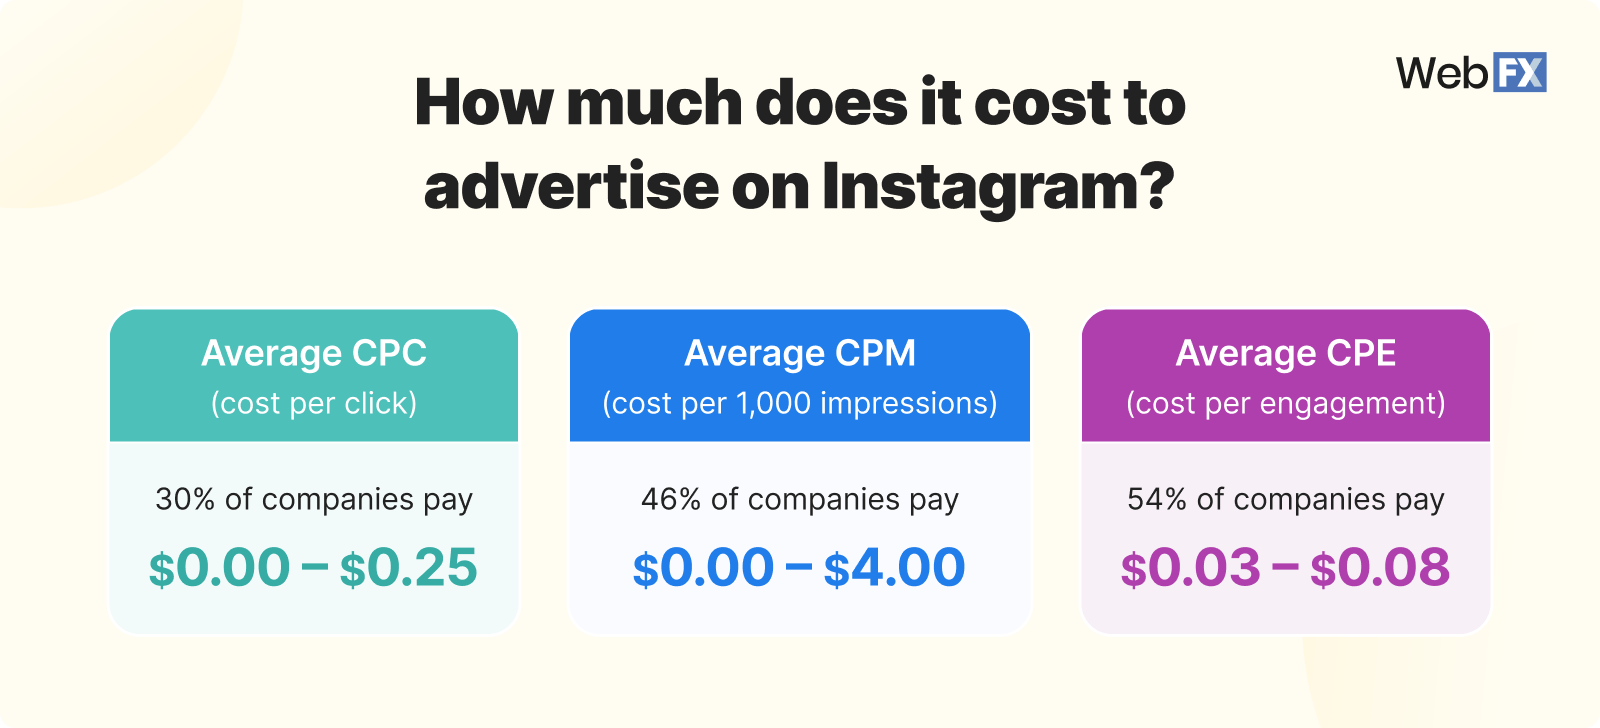 Data visualization with text that reads "how much does it cost to advertise on instagram?" followed by three boxes highlighting the average CPC, CPM and CPE on Instagram.